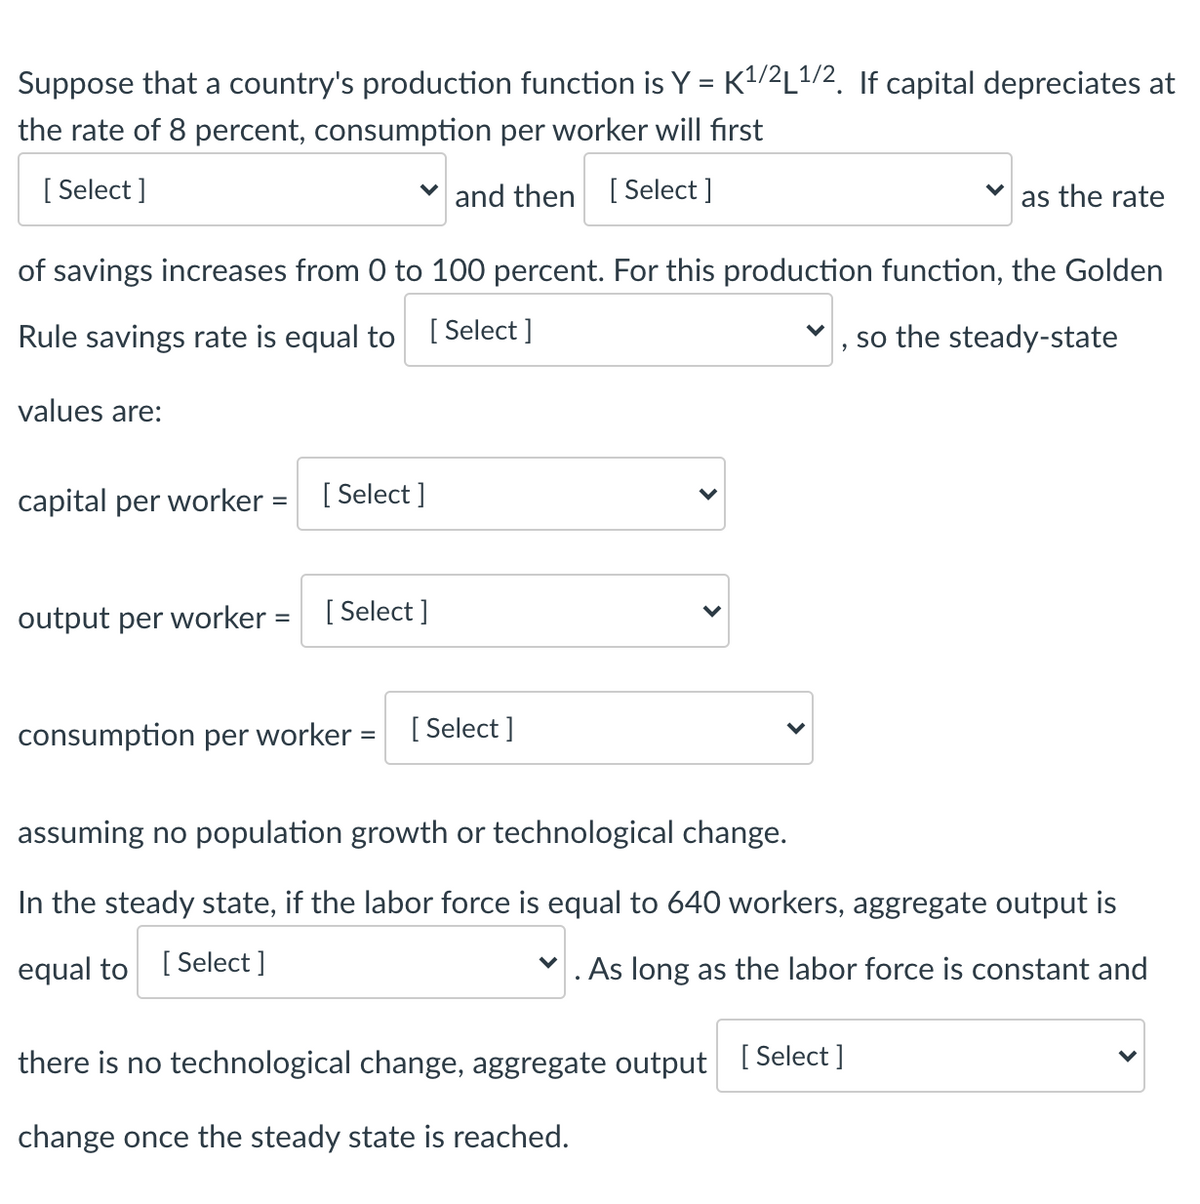 Suppose that a country's production function is Y = K1/2L1/2. If capital depreciates at
the rate of 8 percent, consumption per worker will first
[
[ Select ]
v and then [ Select ]
as the rate
of savings increases from 0 to 100 percent. For this production function, the Golden
Rule savings rate is equal to [ Select ]
so the steady-state
values are:
capital per worker =
[ Select ]
%3D
output per worker = [Select ]
consumption per worker =
[ Select ]
assuming no population growth or technological change.
In the steady state, if the labor force is equal to 640 workers, aggregate output is
equal to
[ Select ]
. As long as the labor force is constant and
there is no technological change, aggregate output I Select ]
change once the steady state is reached.
>
